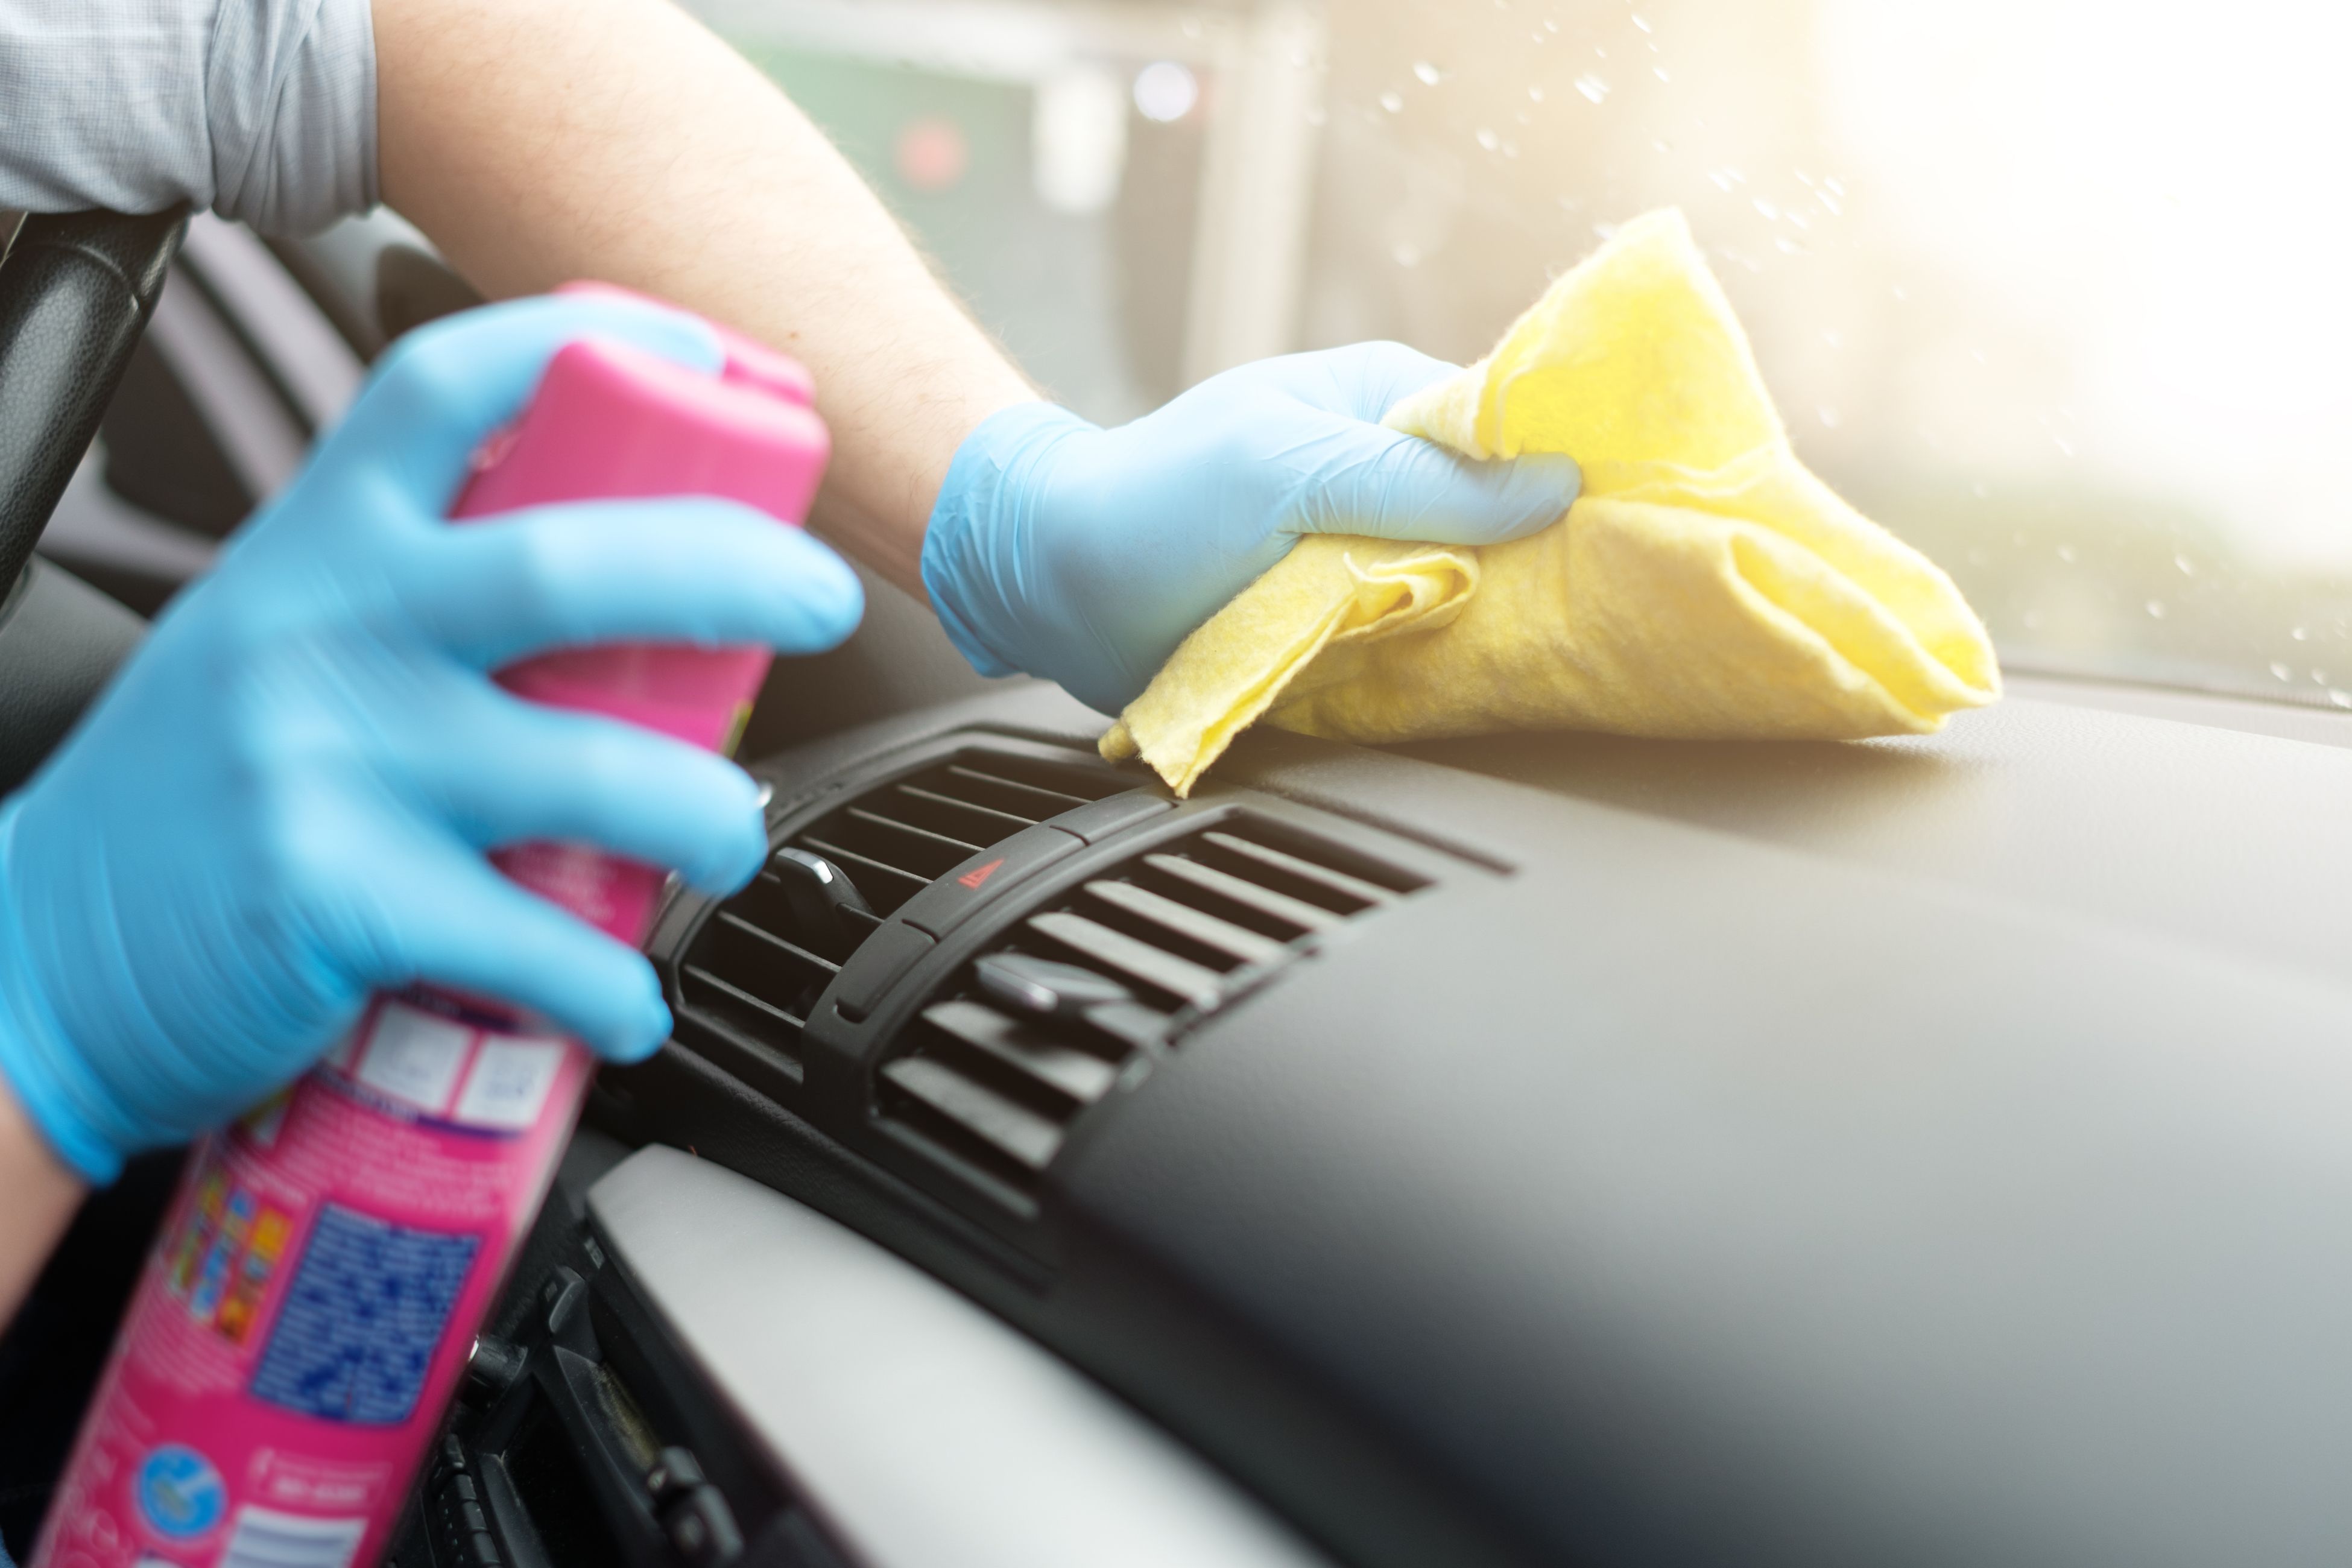 Keep your car clean and dry